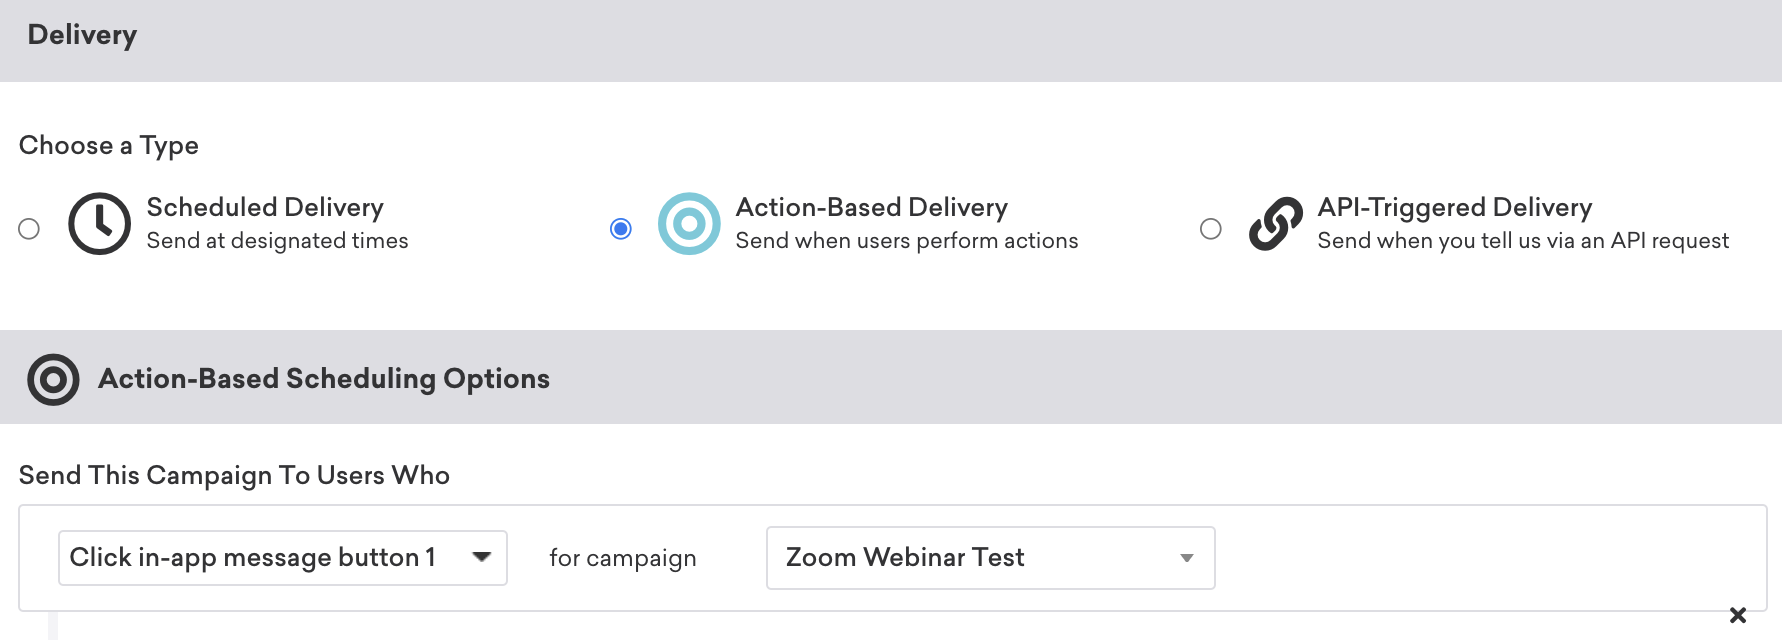 An action-based campaign that will be sent to users who clicked a button for a specific campaign.